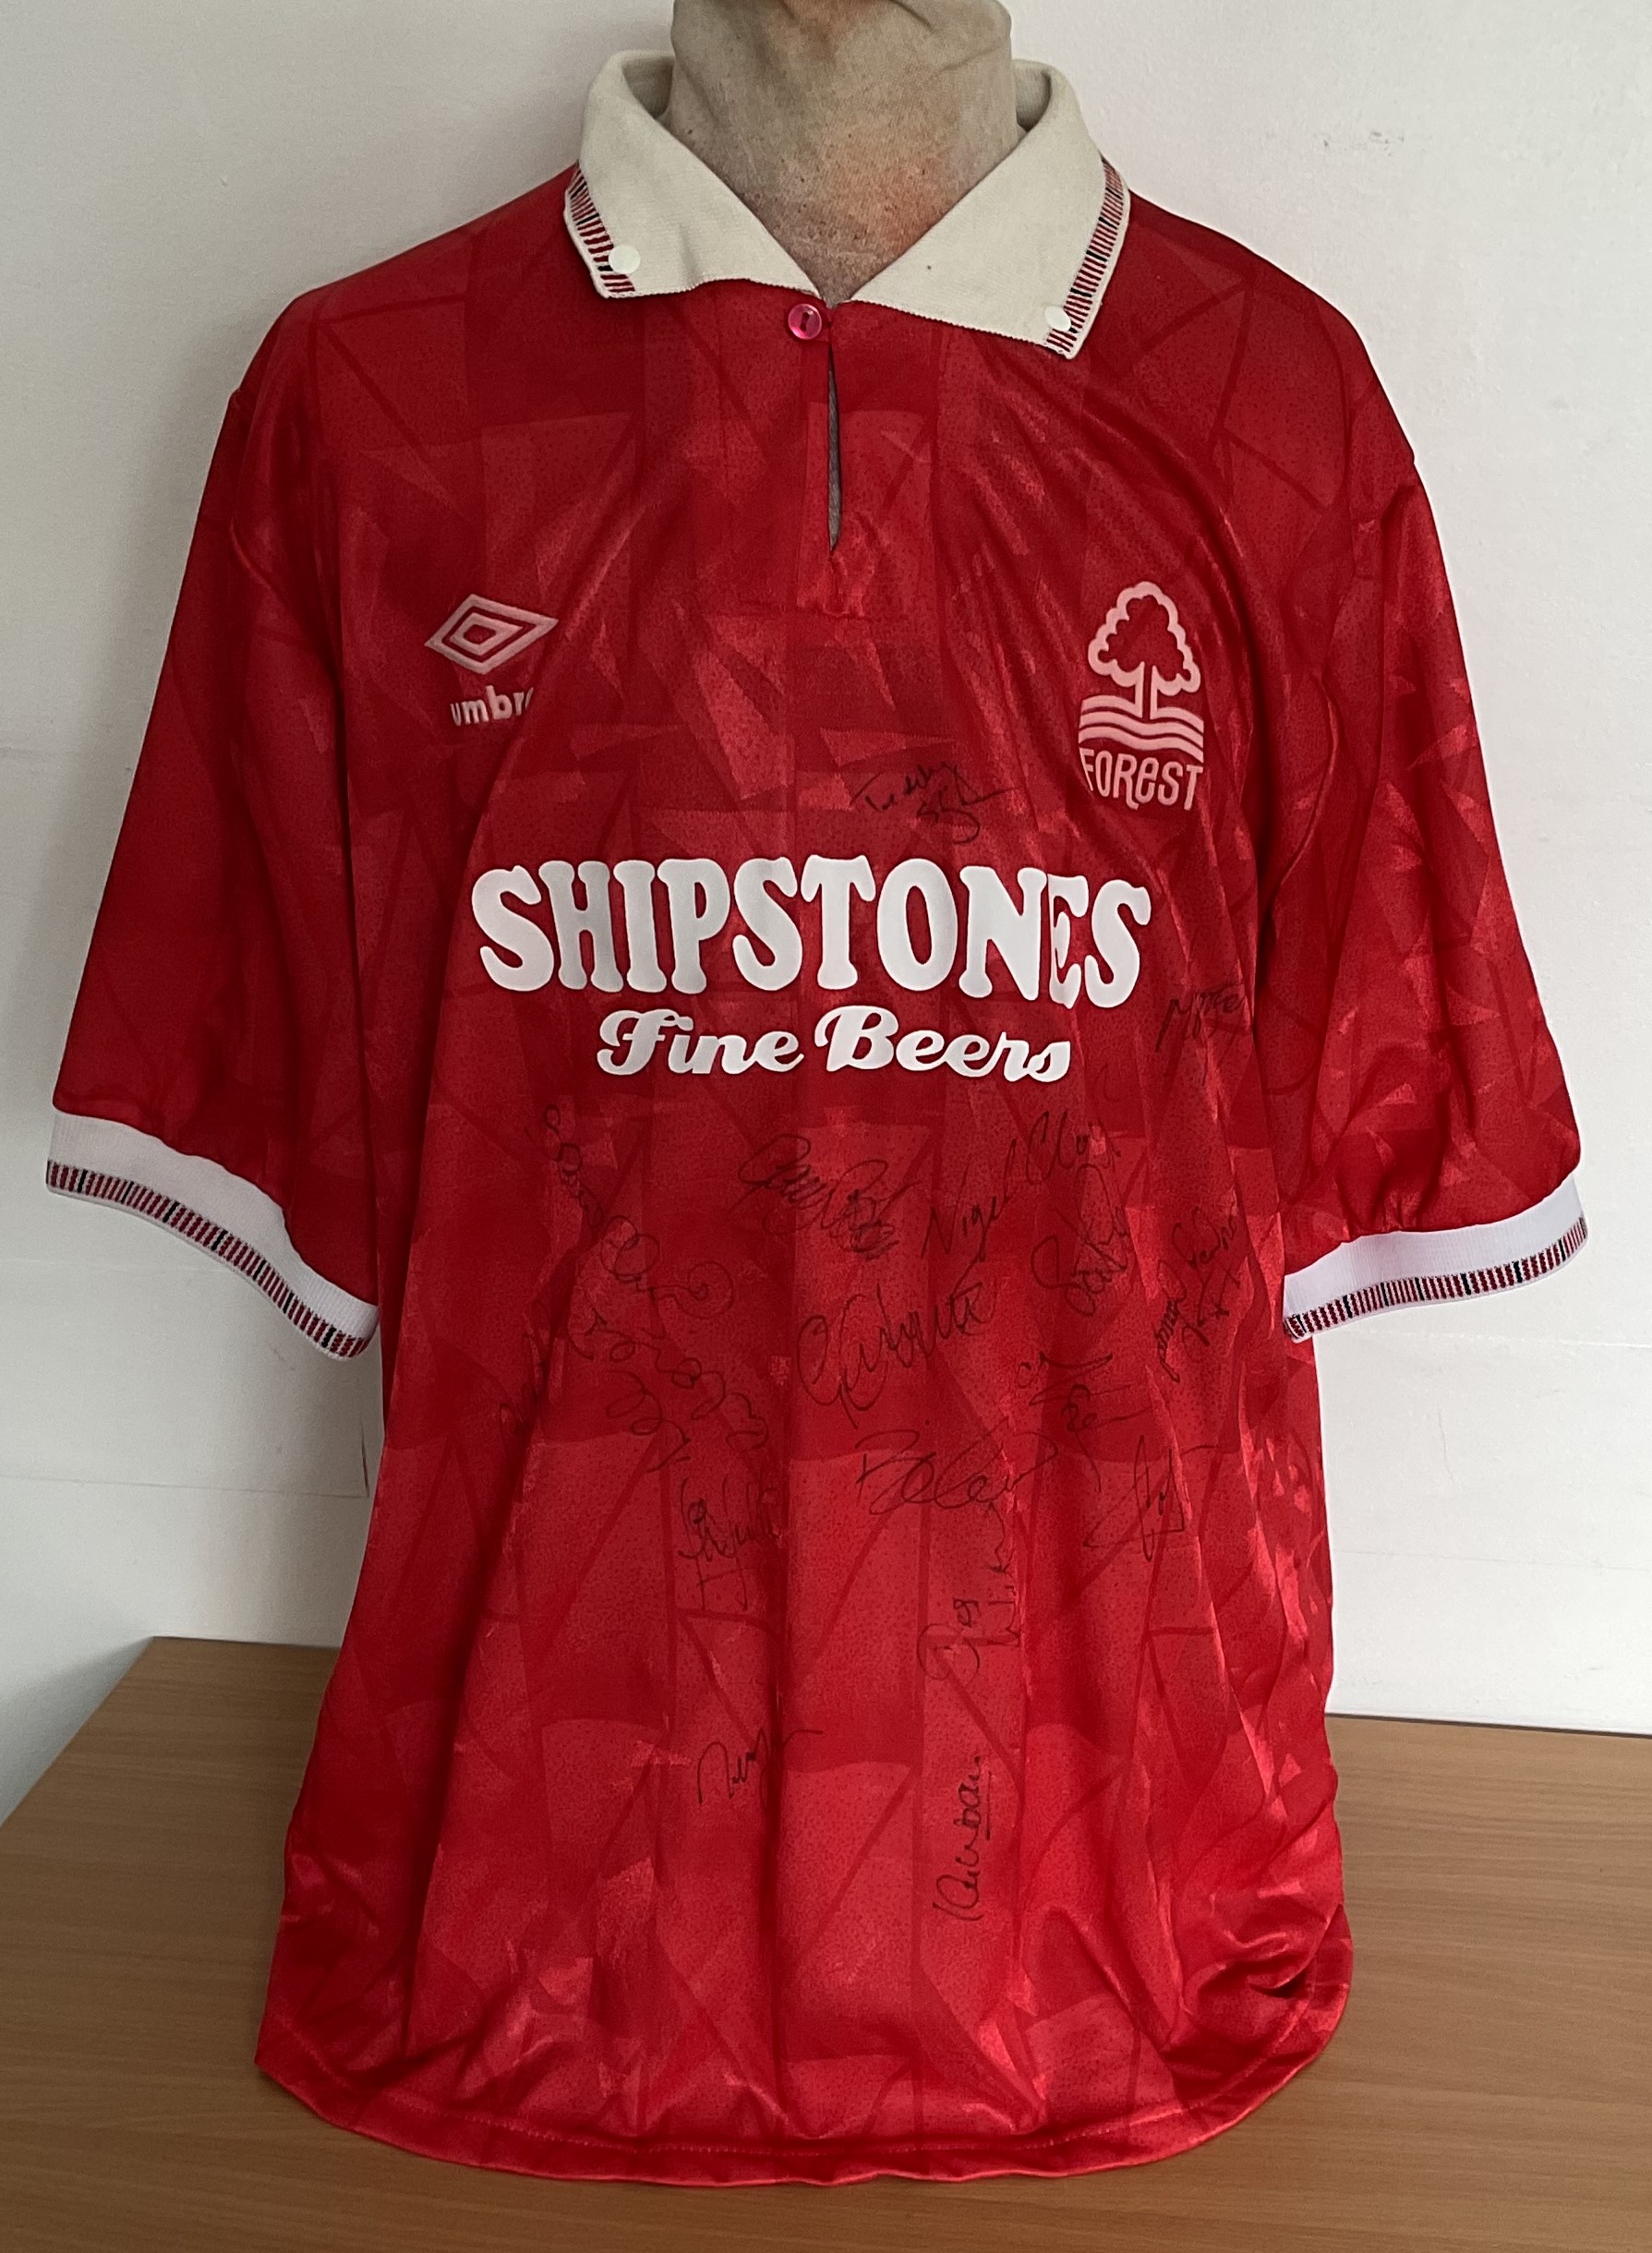 Nottingham Forest 91/92 multi signed replica home shirt 18 fantastic signatures includes Teddy